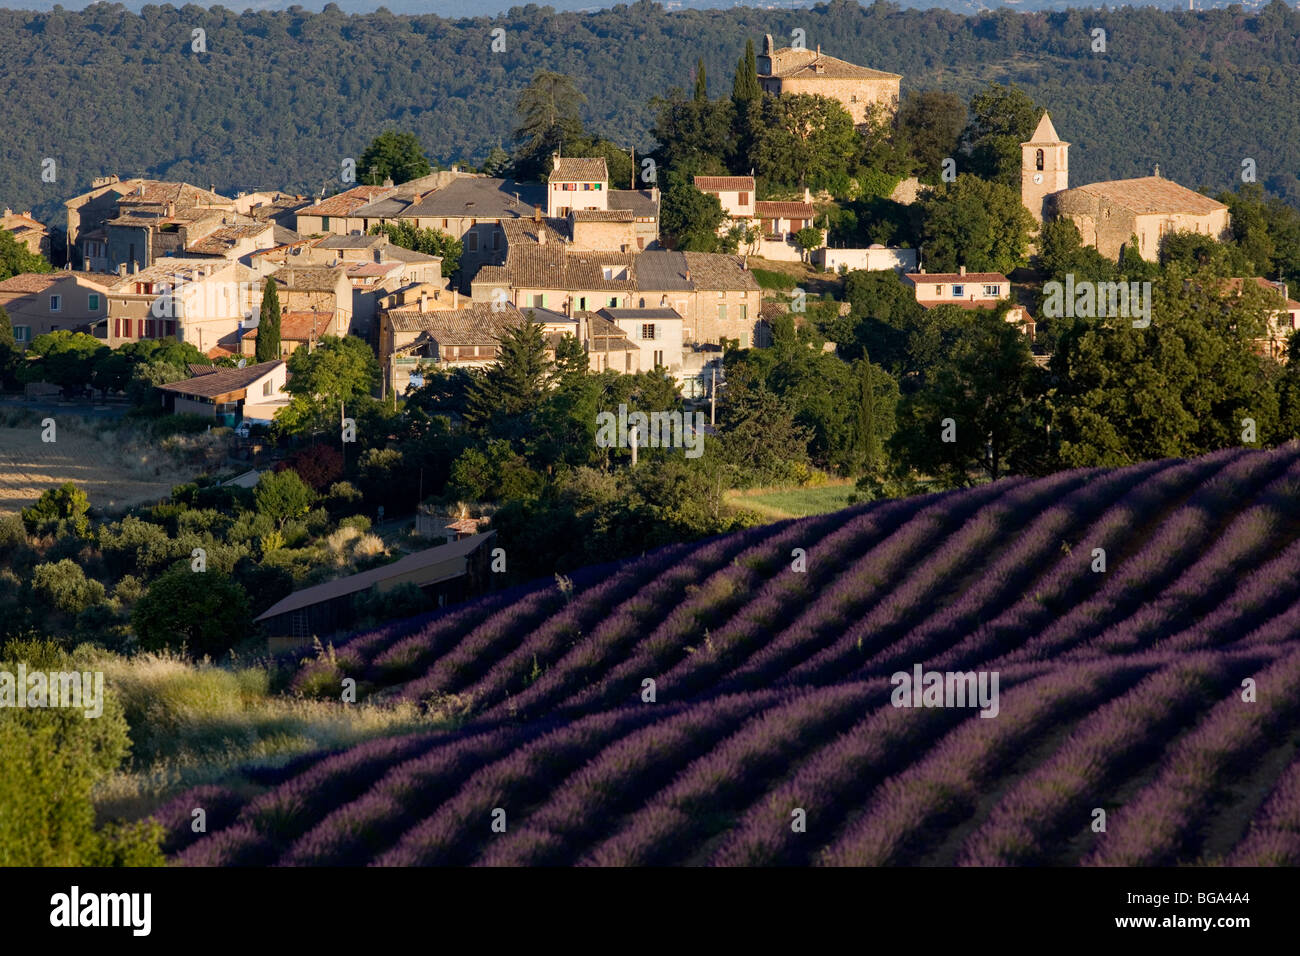 France, Alpes-de-Haute-Provence, Entrevennes, overview of the village and lavender field Stock Photo